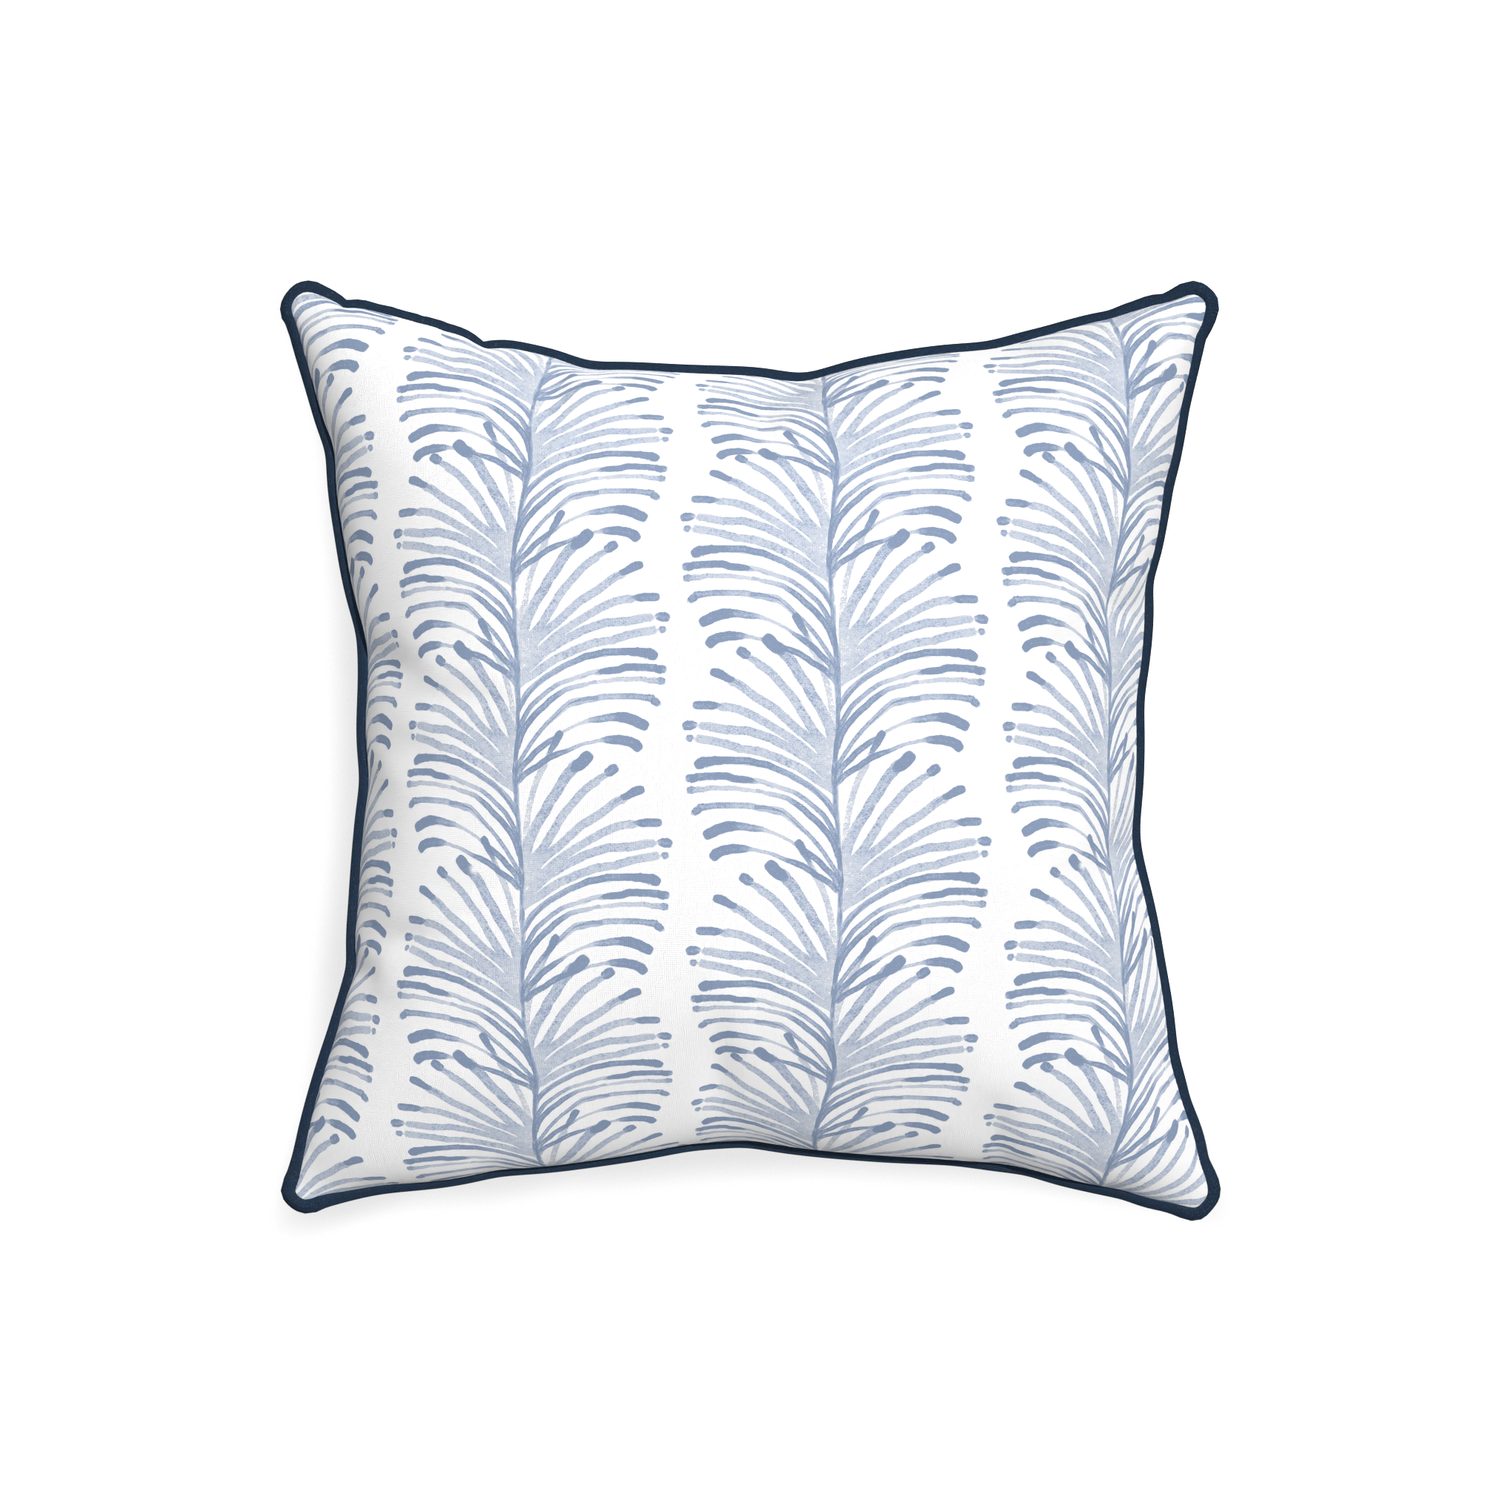 20-square emma sky custom sky blue botanical stripepillow with c piping on white background